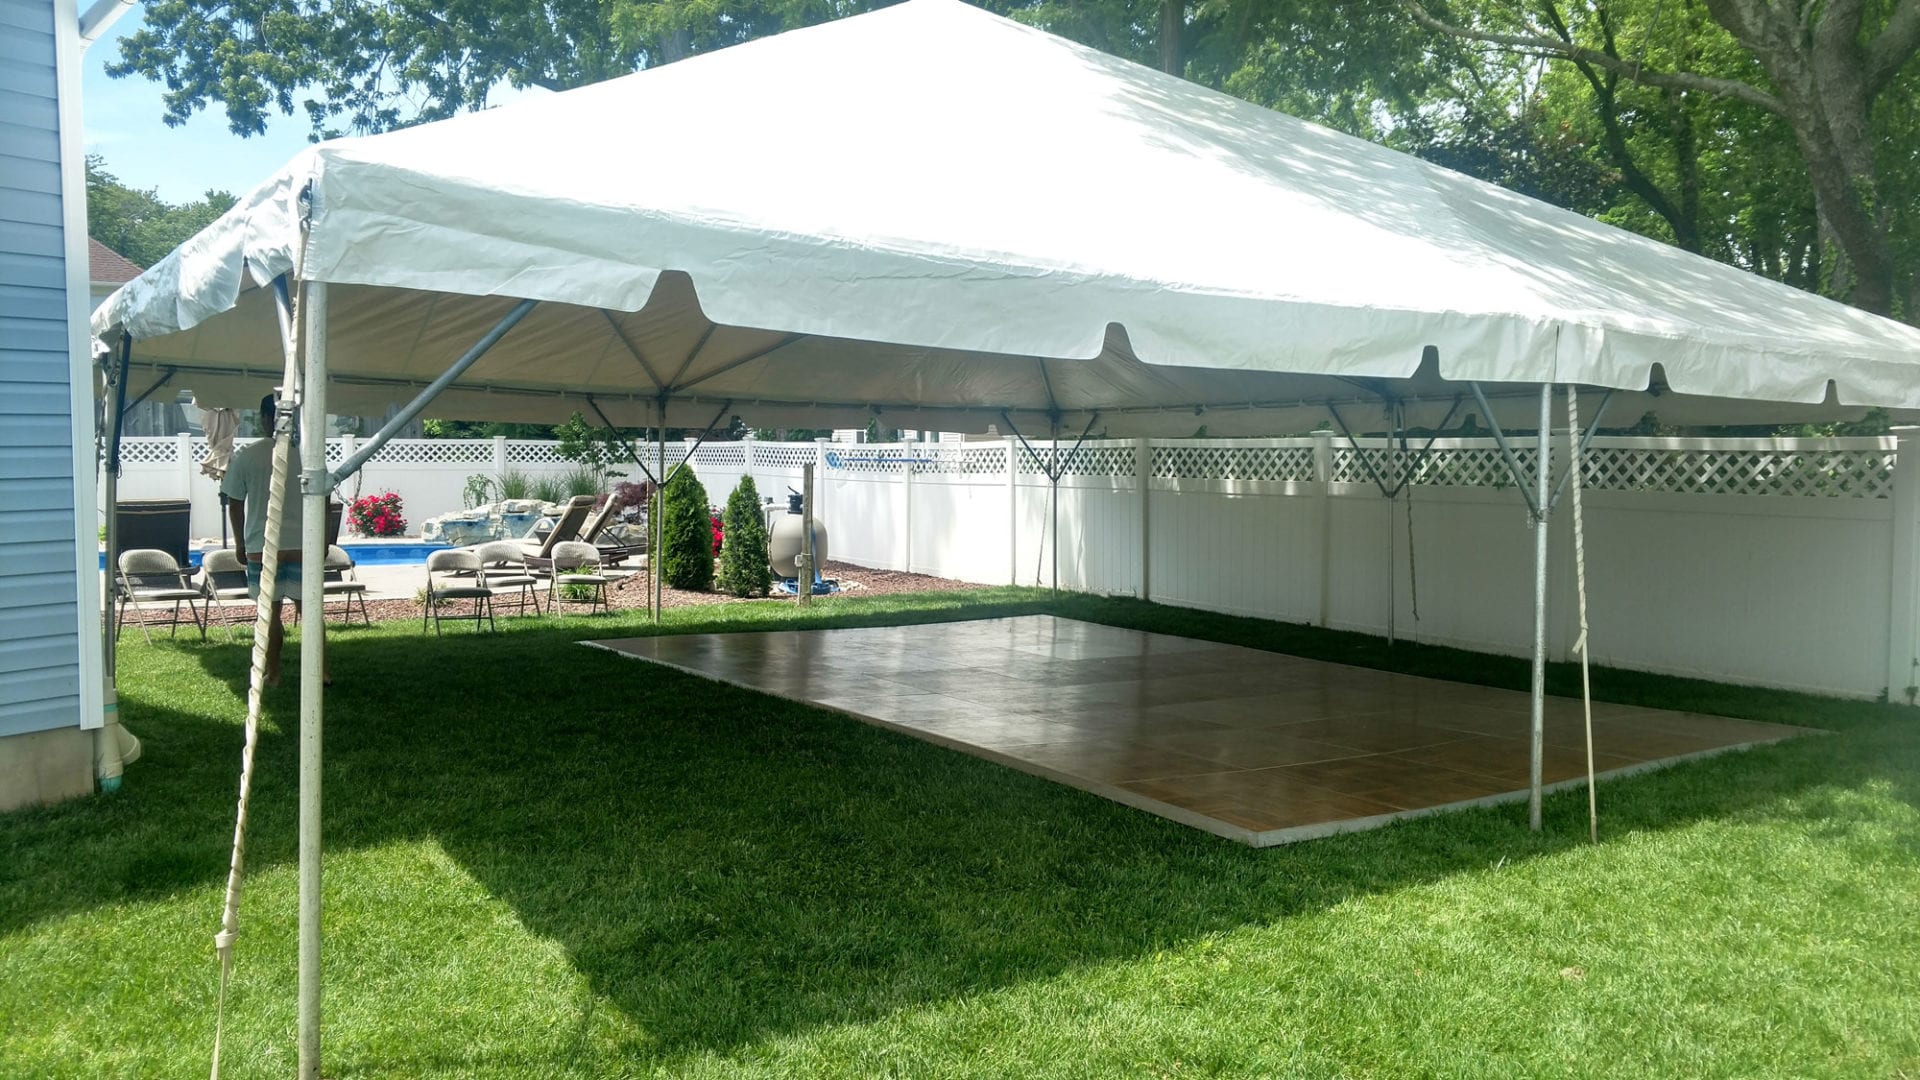 A white tent with wood floor